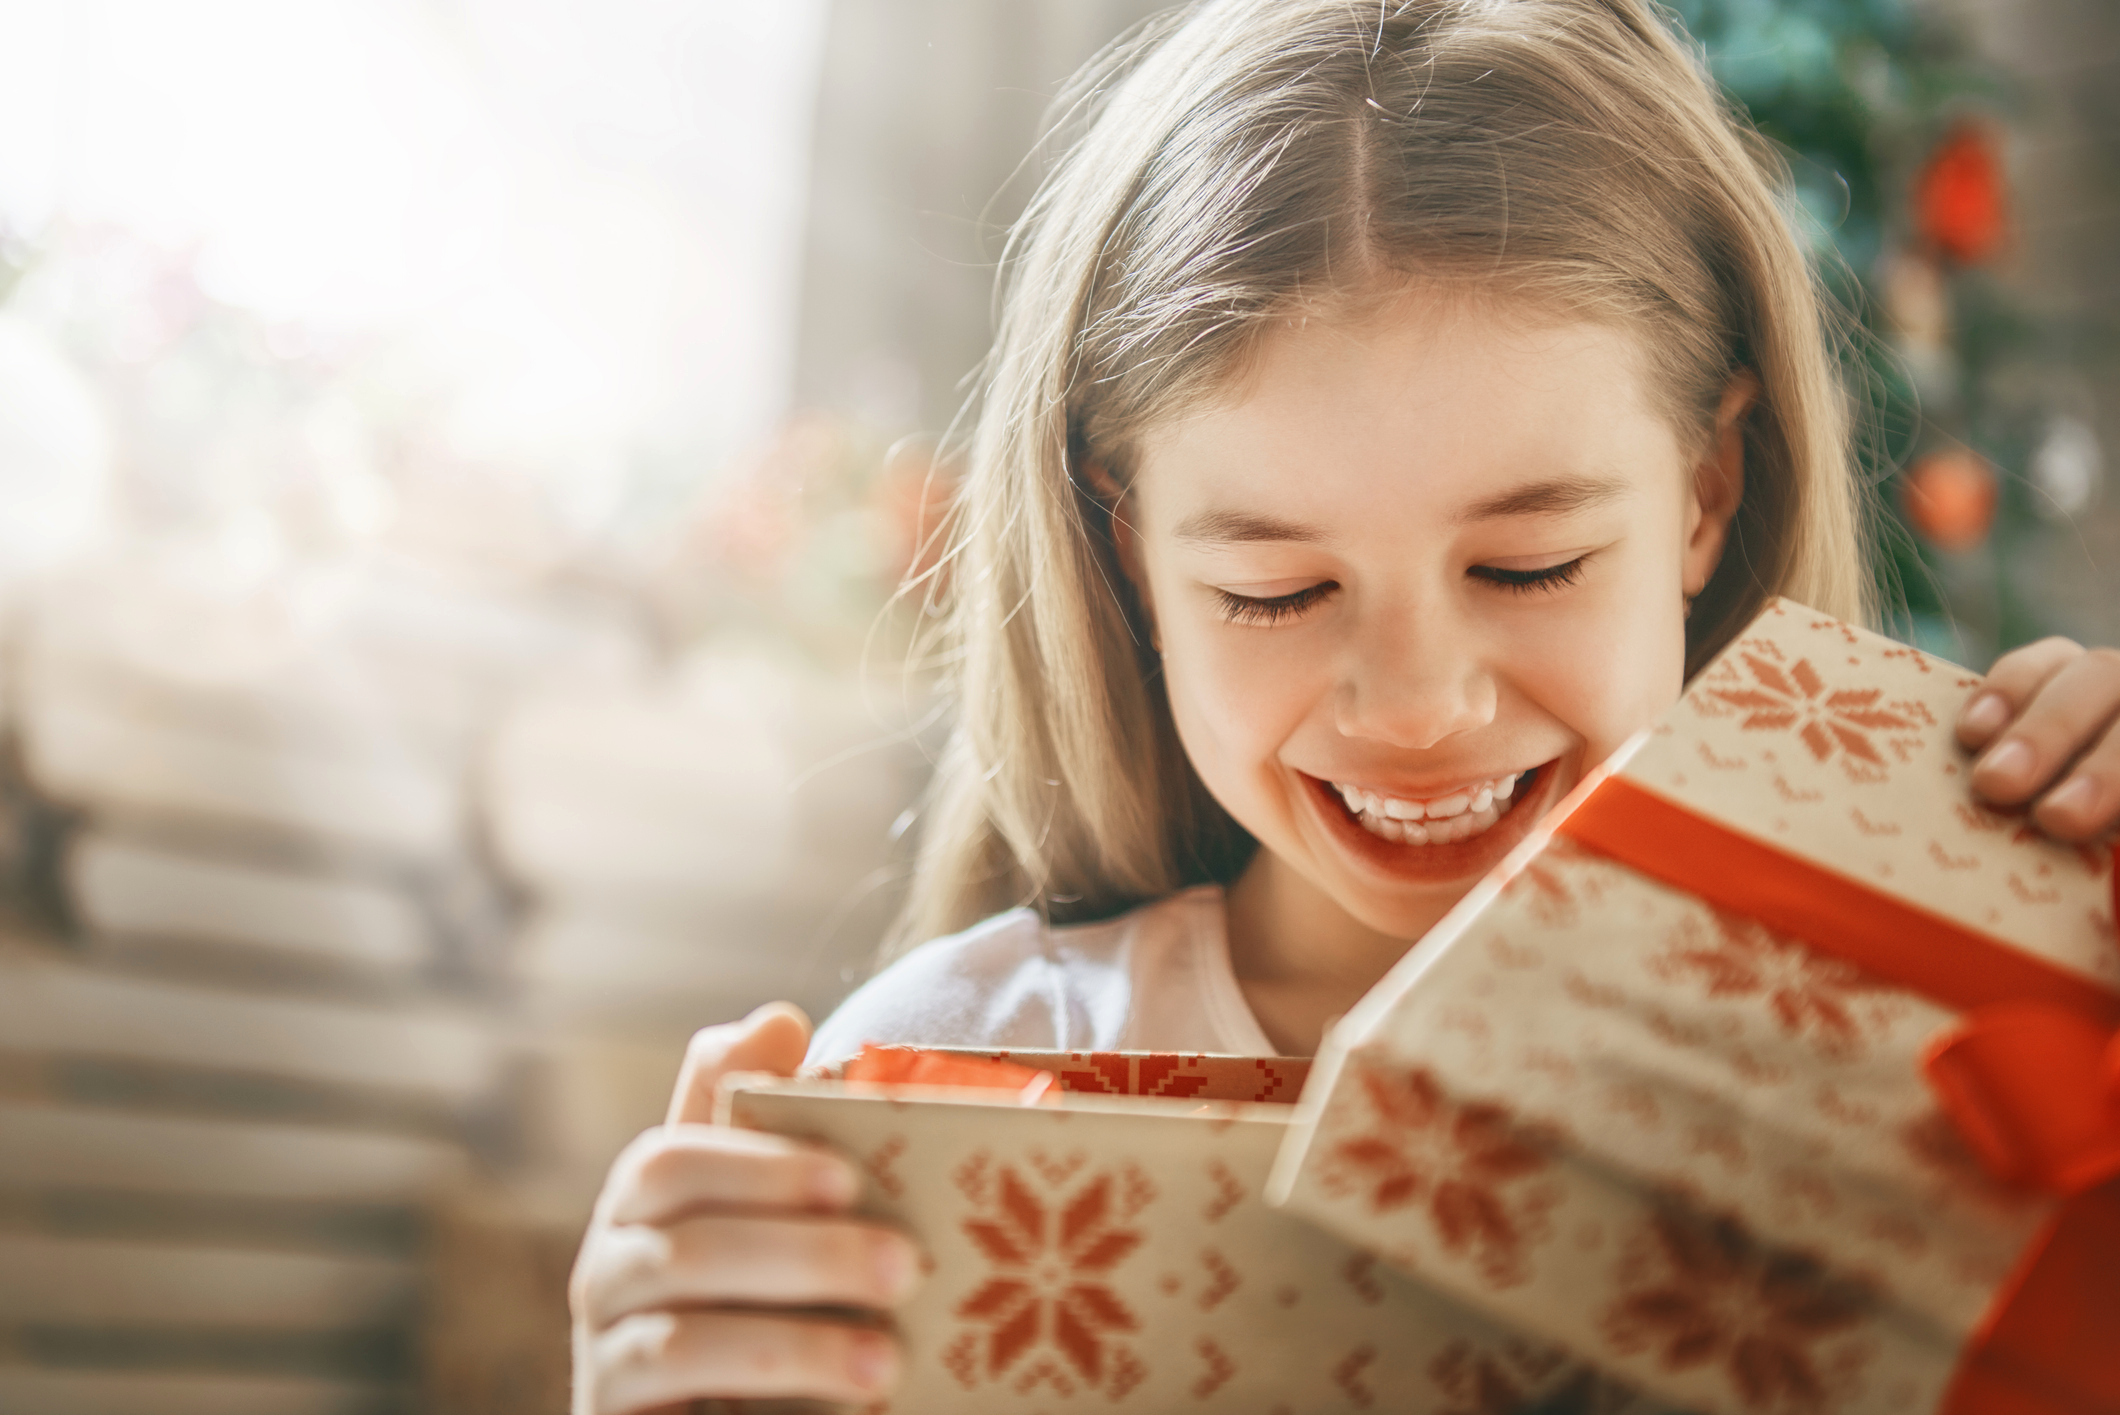 A young girl with long hair is smiling and looking down at an open gift box wrapped in festive paper with red snowflake patterns and a red ribbon. The background appears to be decorated for the holiday season.